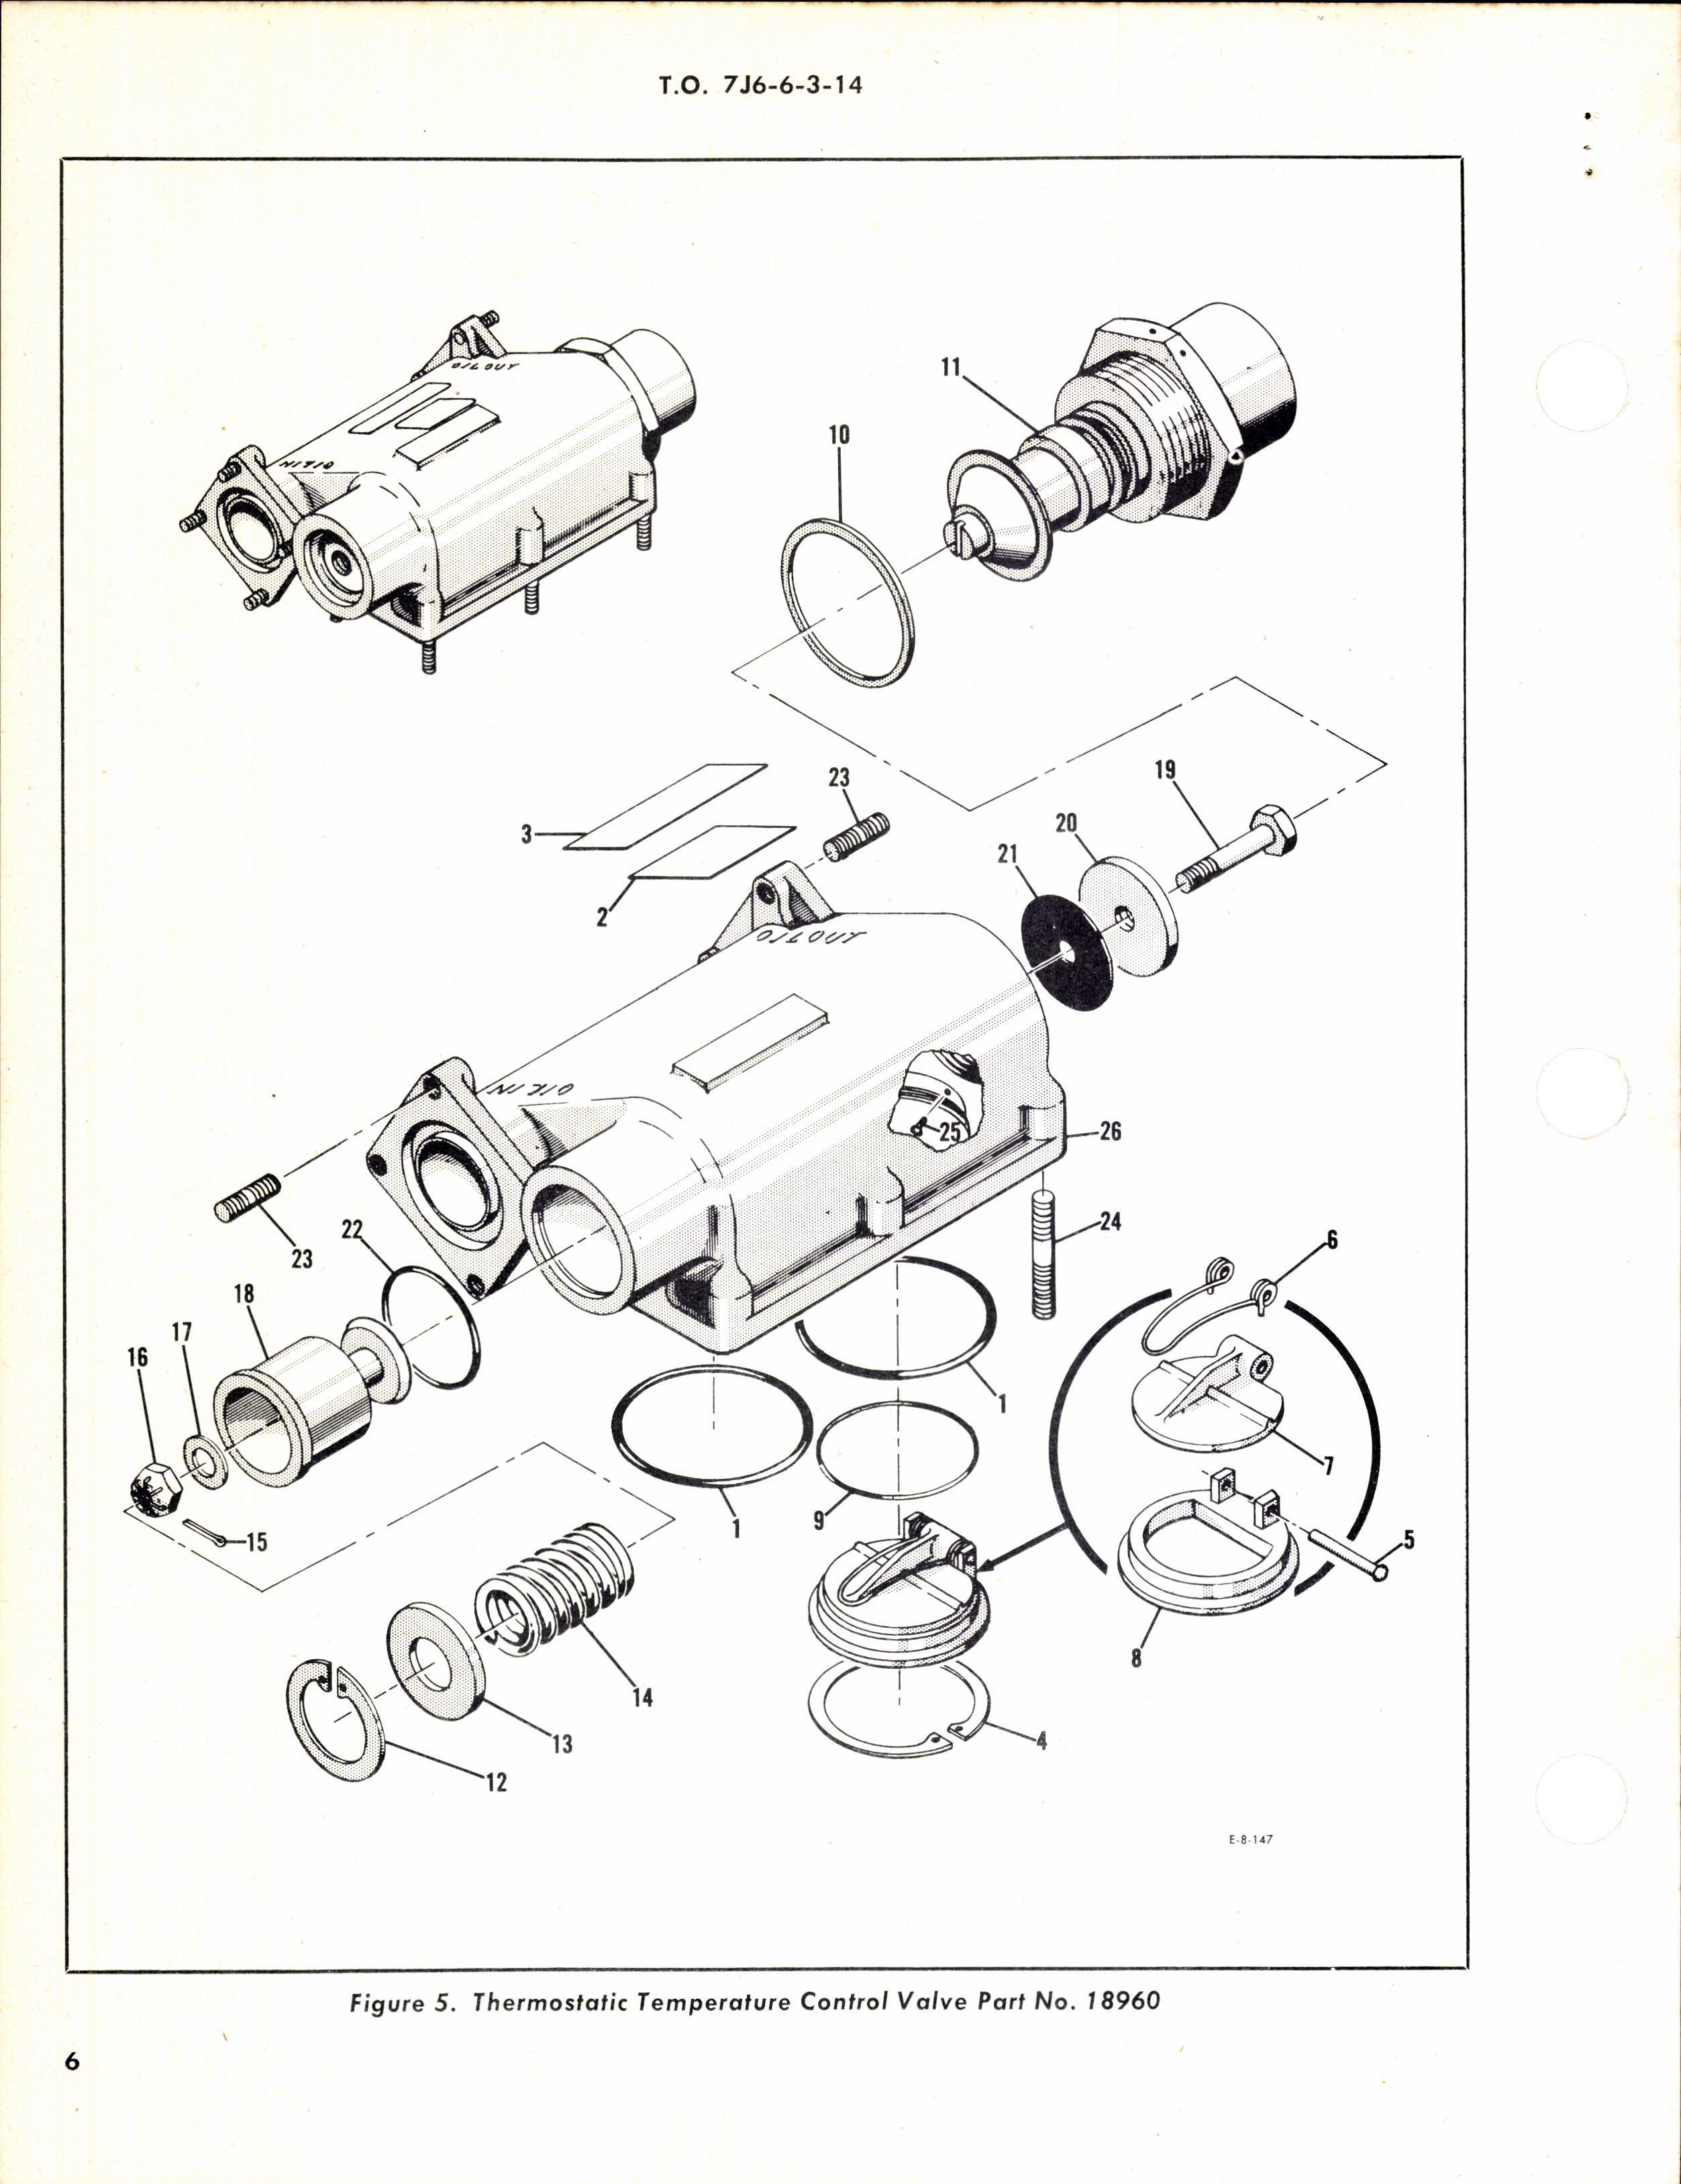 Sample page 6 from AirCorps Library document: Illustrated Parts Breakdown for Thermostatic Temperature Control Valves